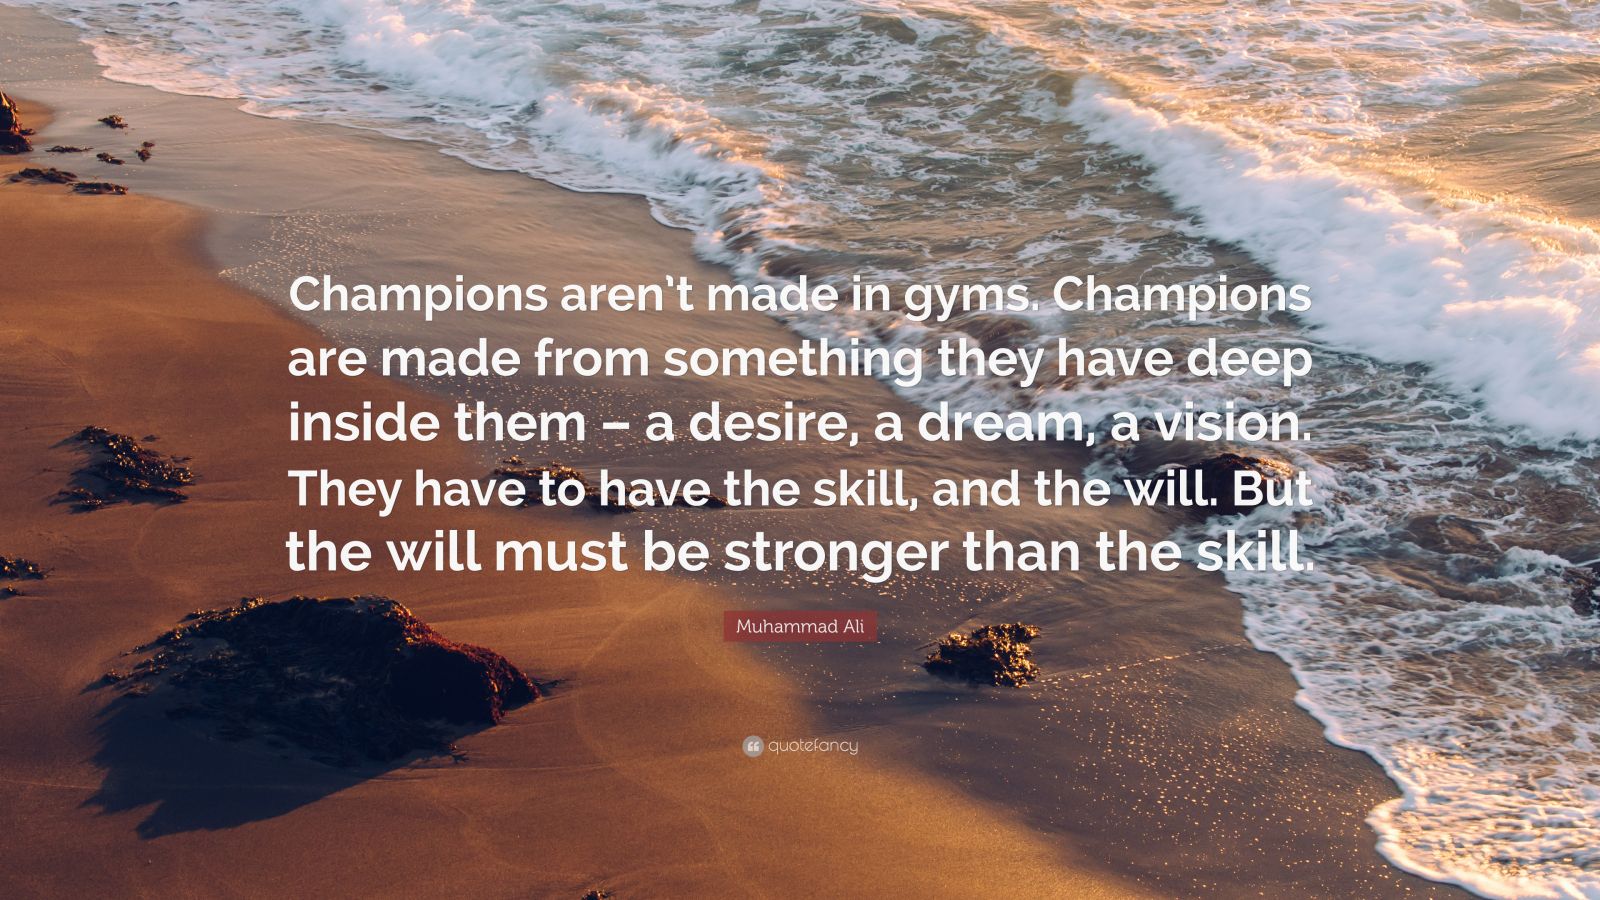 Muhammad Ali Quote: “Champions aren’t made in gyms. Champions are made